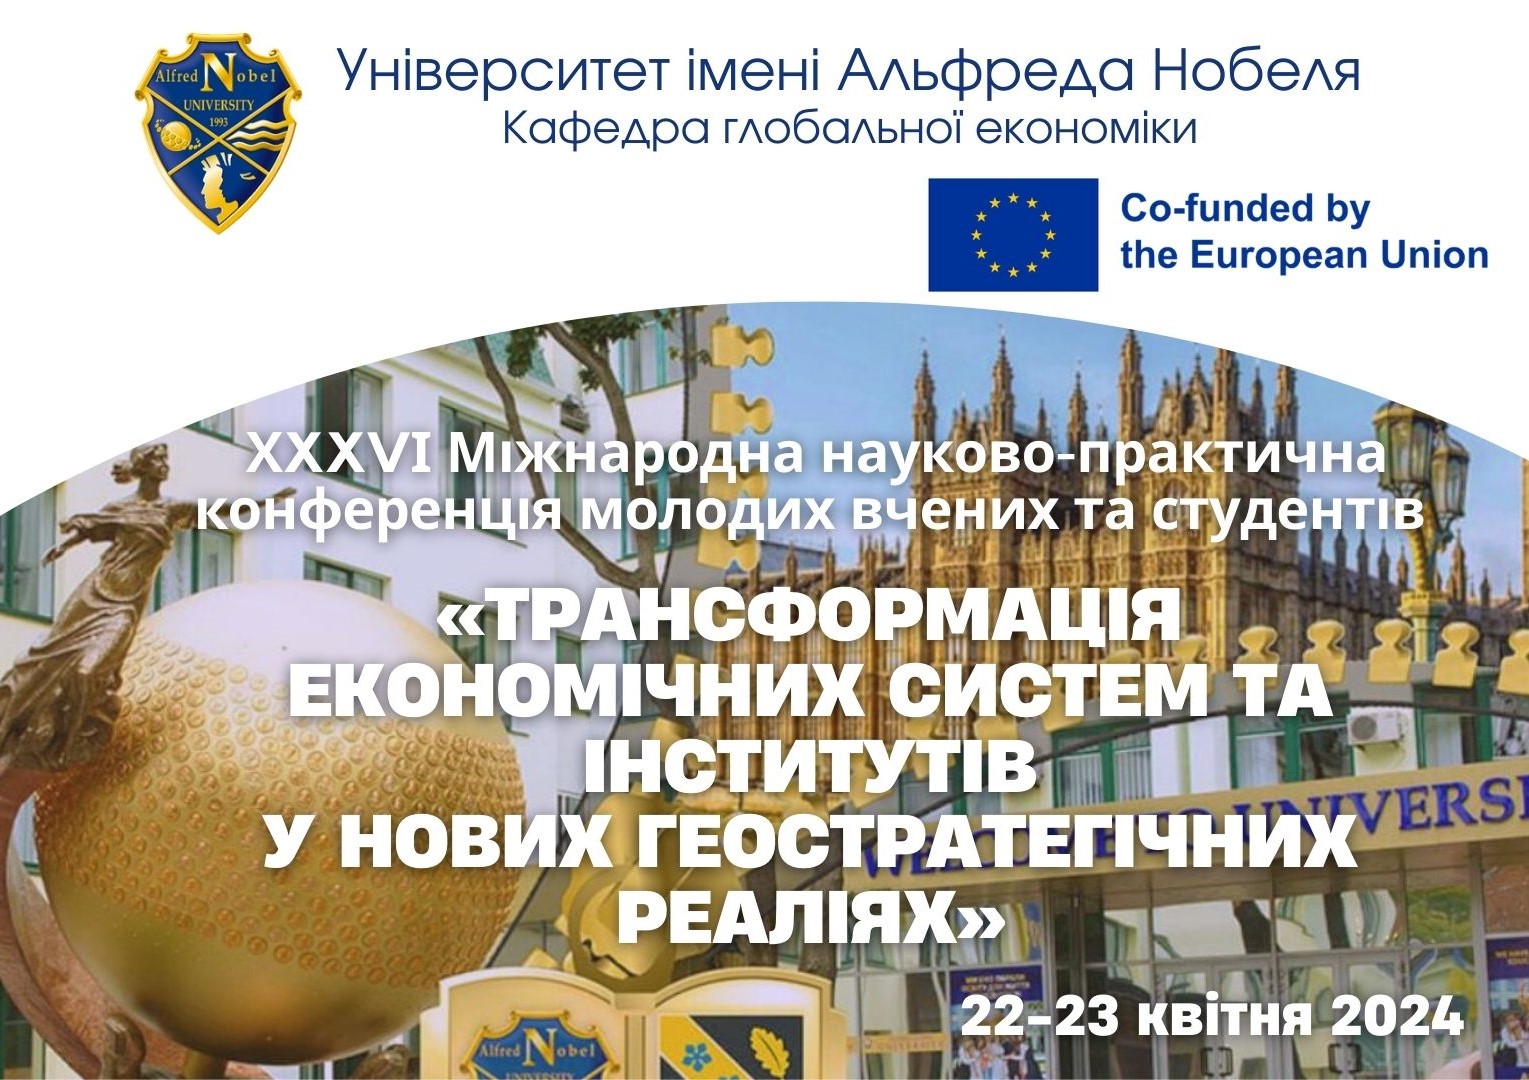 Poster of the XXXVI International Scientific and Practical Conference of Young Scientists and Students on 'Transformation of Economic Systems and Institutions in the New Geostrategic Realities', co-funded by the European Union, held at Alfred Nobel University on April 22-23, 2024. 